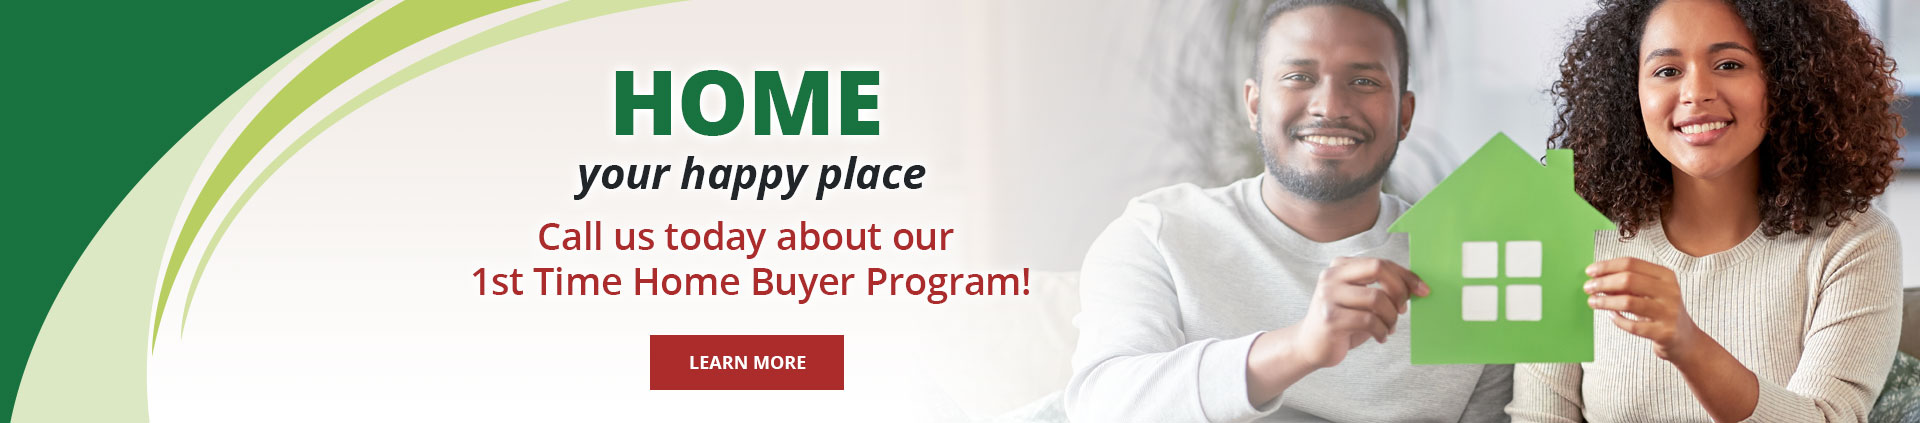 Home - your happy place. Call us today about our 1st Time Home Buyer Program! Learn More